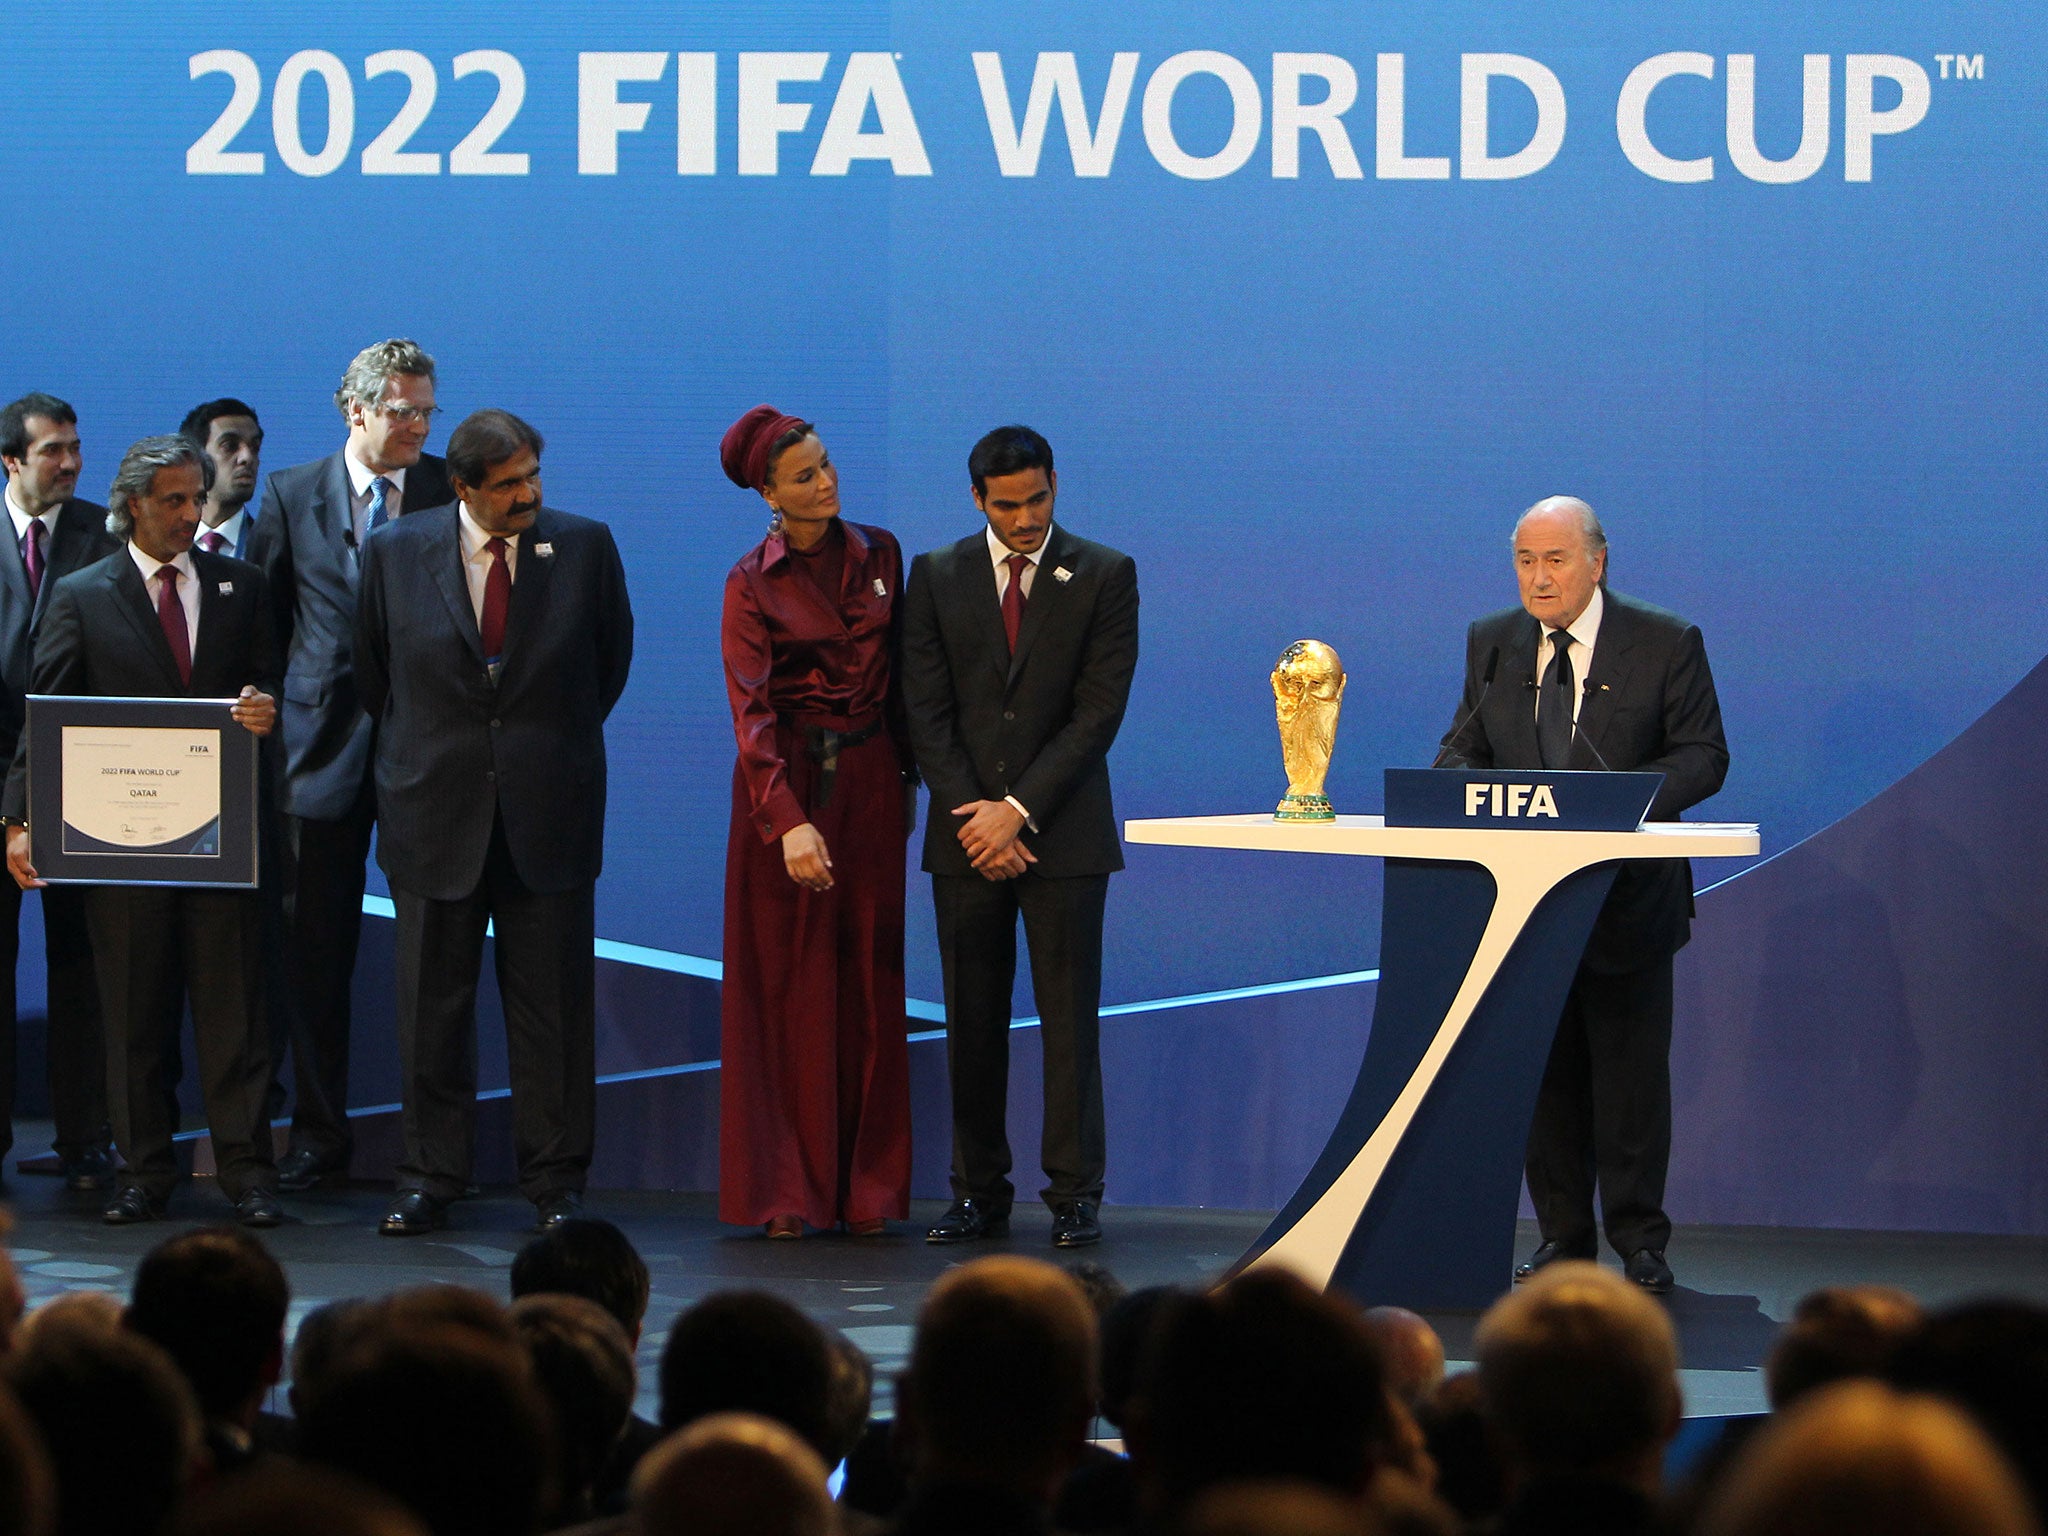 Qatar was controversially handed the 2022 World Cup in 2010 when Fifa was under Sepp Blatter’s stewardship